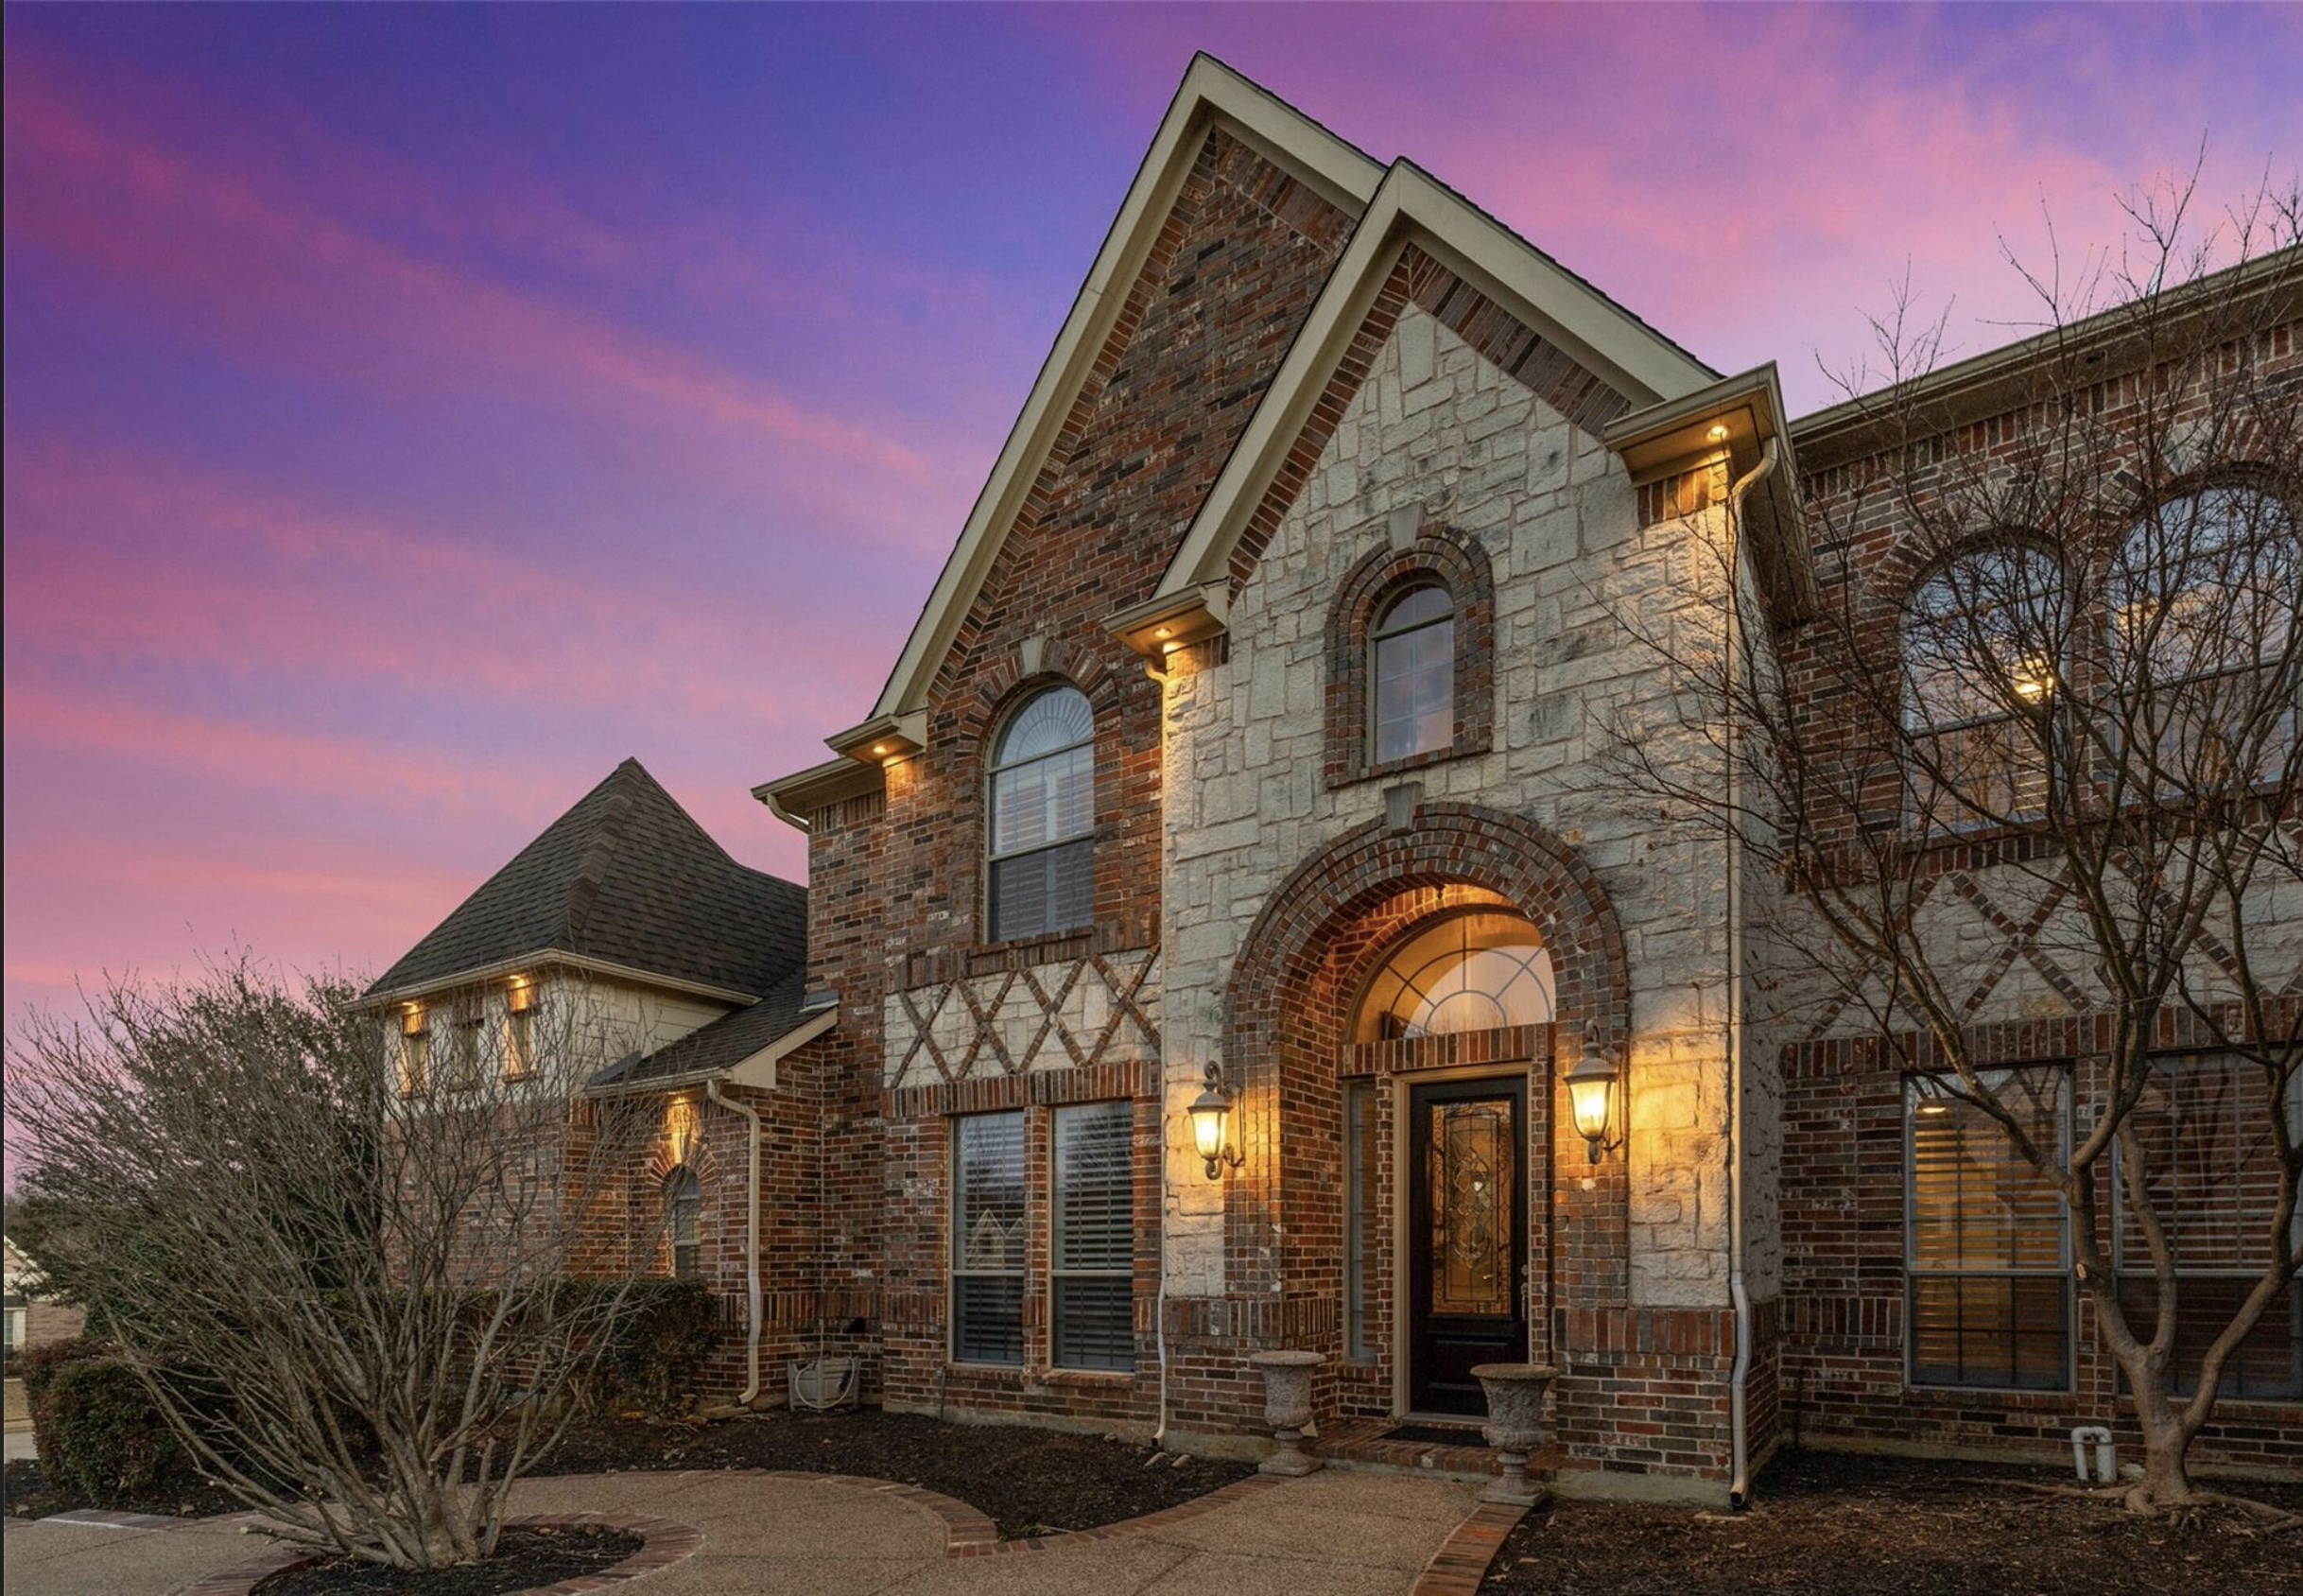 “The Pam Heinrich Home Team are hands down – the best real estate team in the Dallas Plano area !!